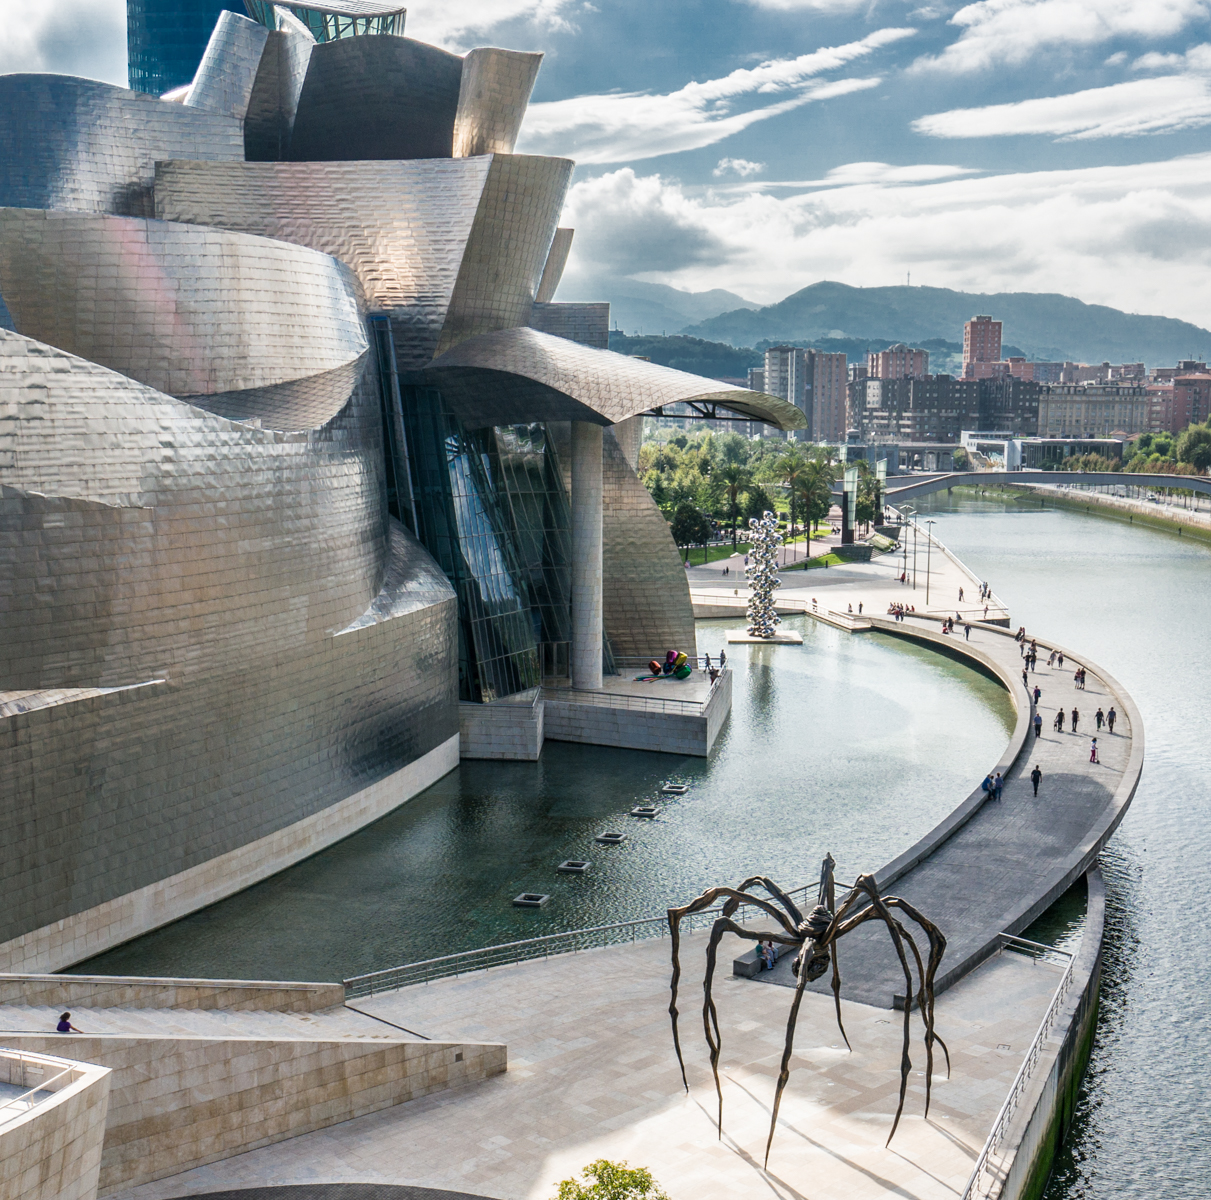 View from a bridge of the Guggenheim Museum Bilbao that includes its exterior sculptures Tulips by Jeff Koons and Maman by Louise Bourgeois | Photo by Mike Hudak